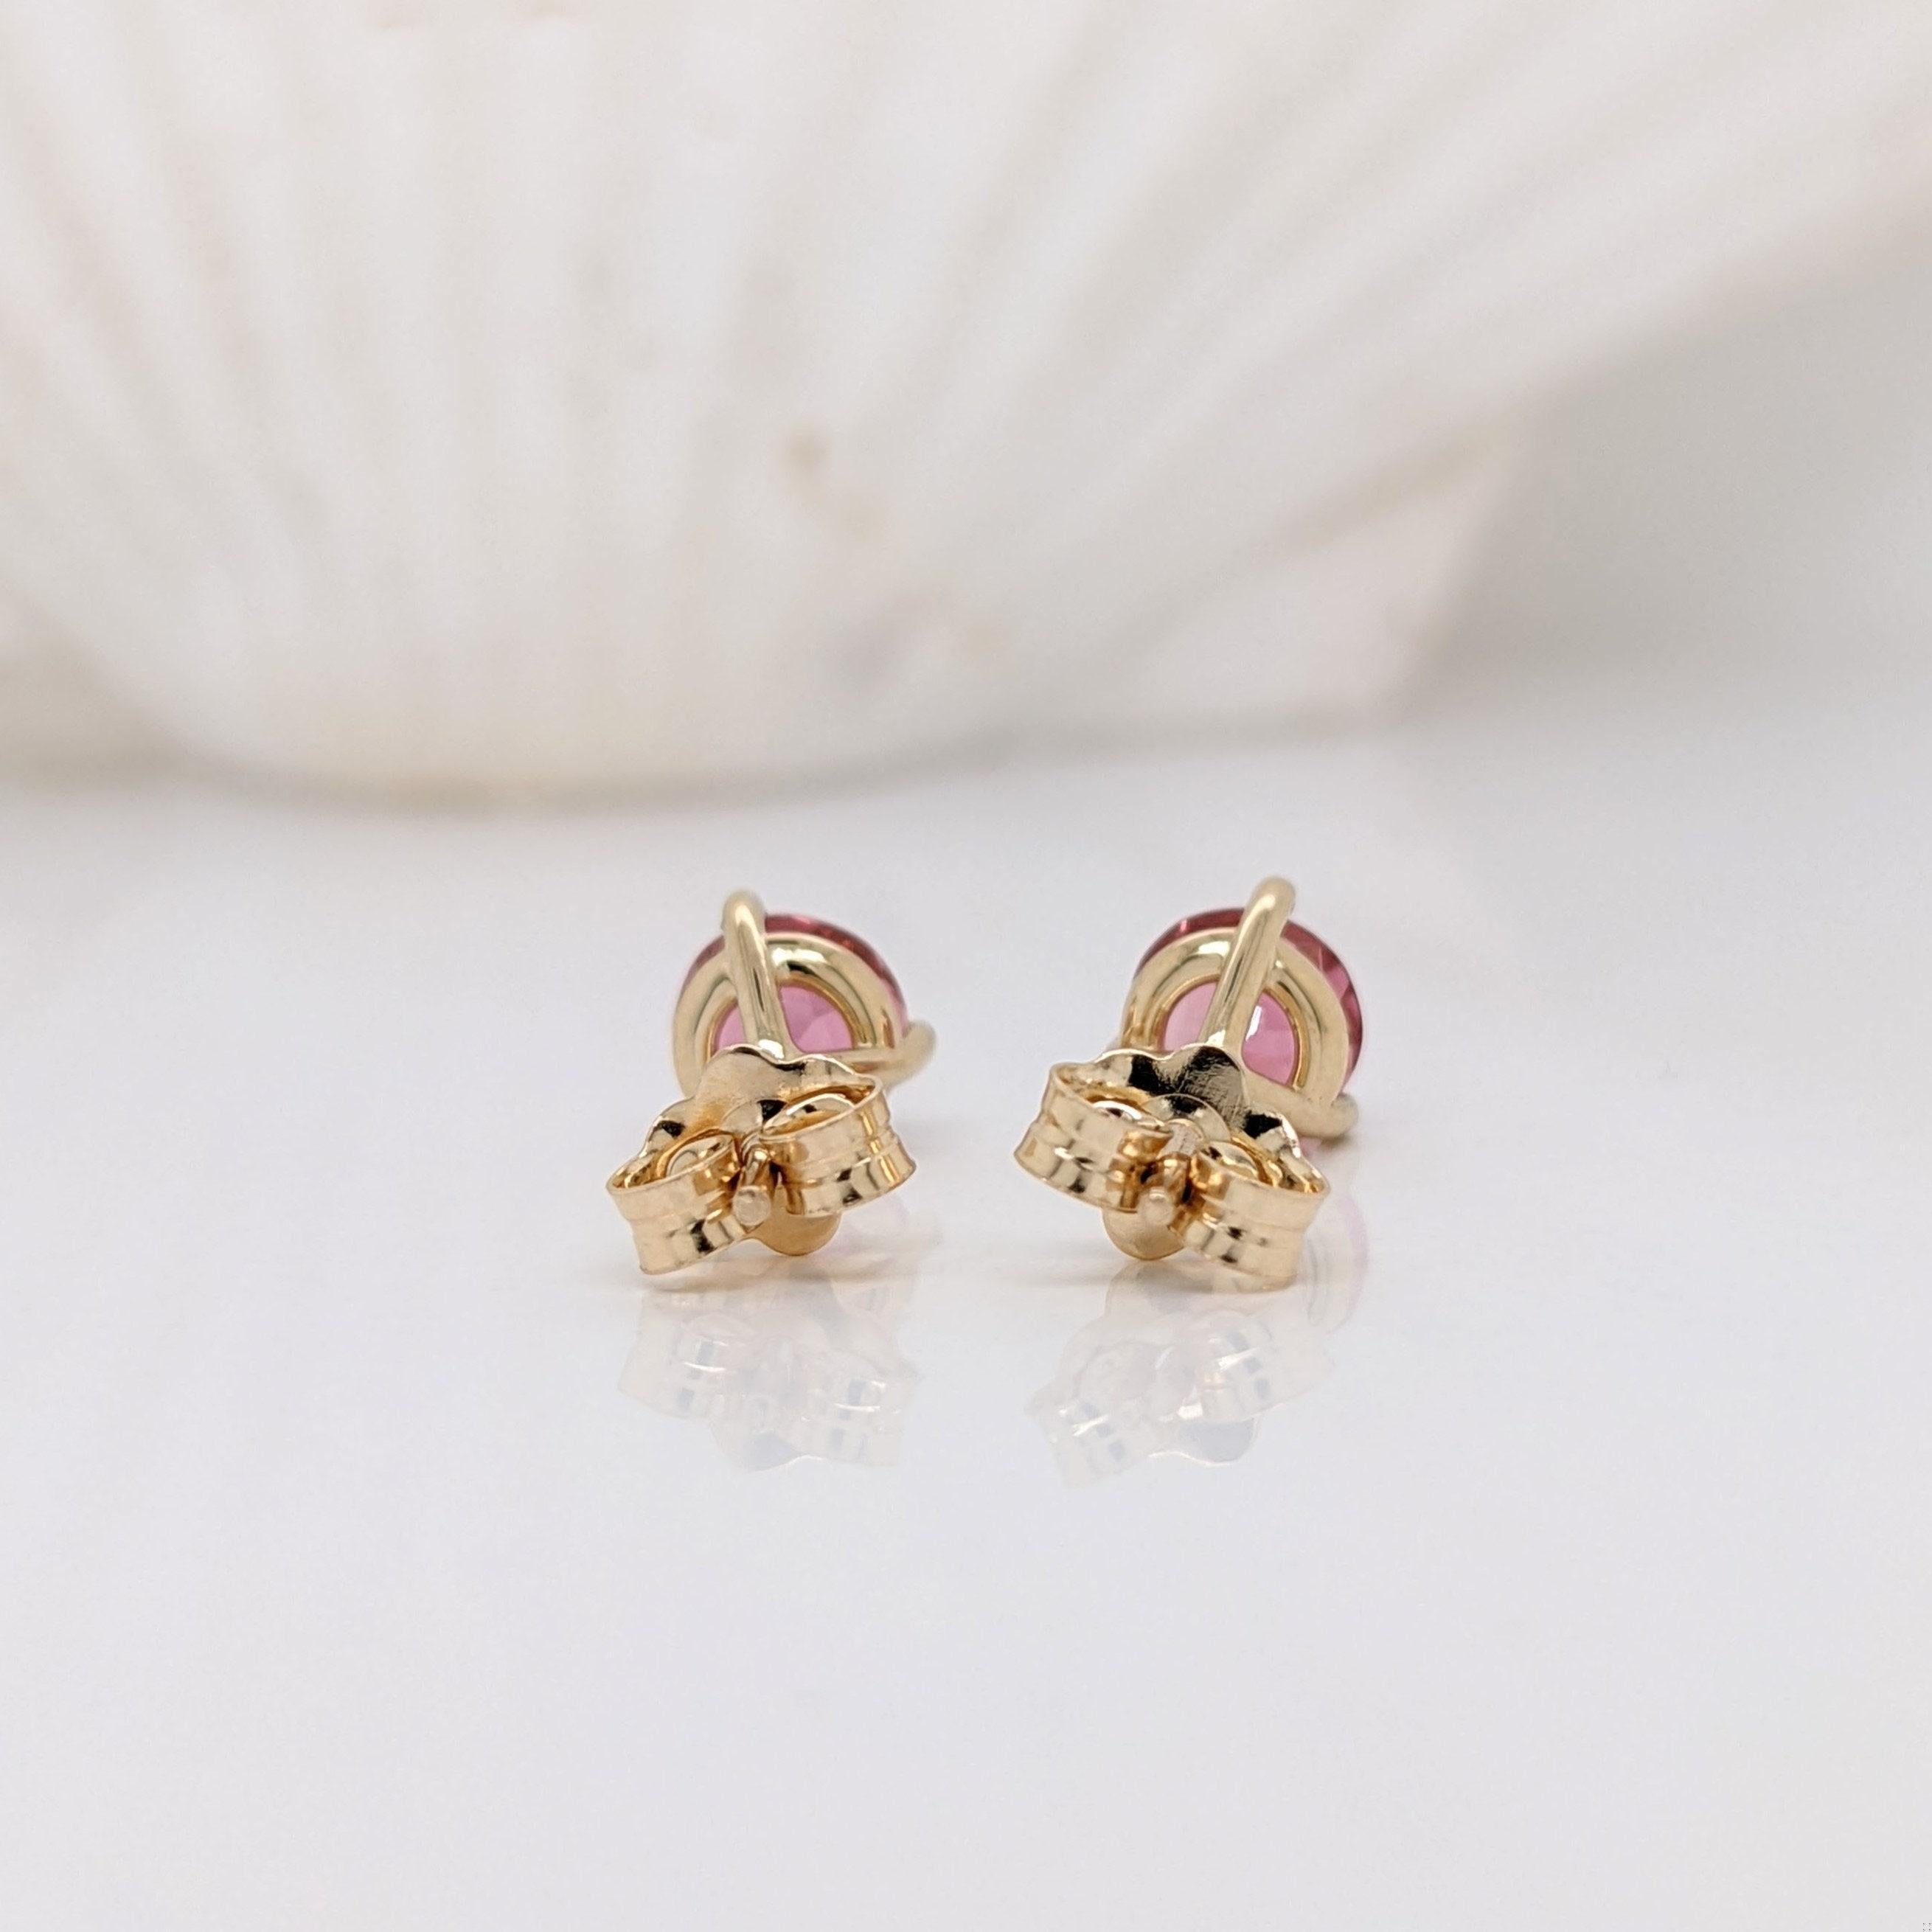 Round Cut Pink Tourmaline Studs w Martini Prong in 14k White, Yellow, Rose Gold Round 5mm For Sale